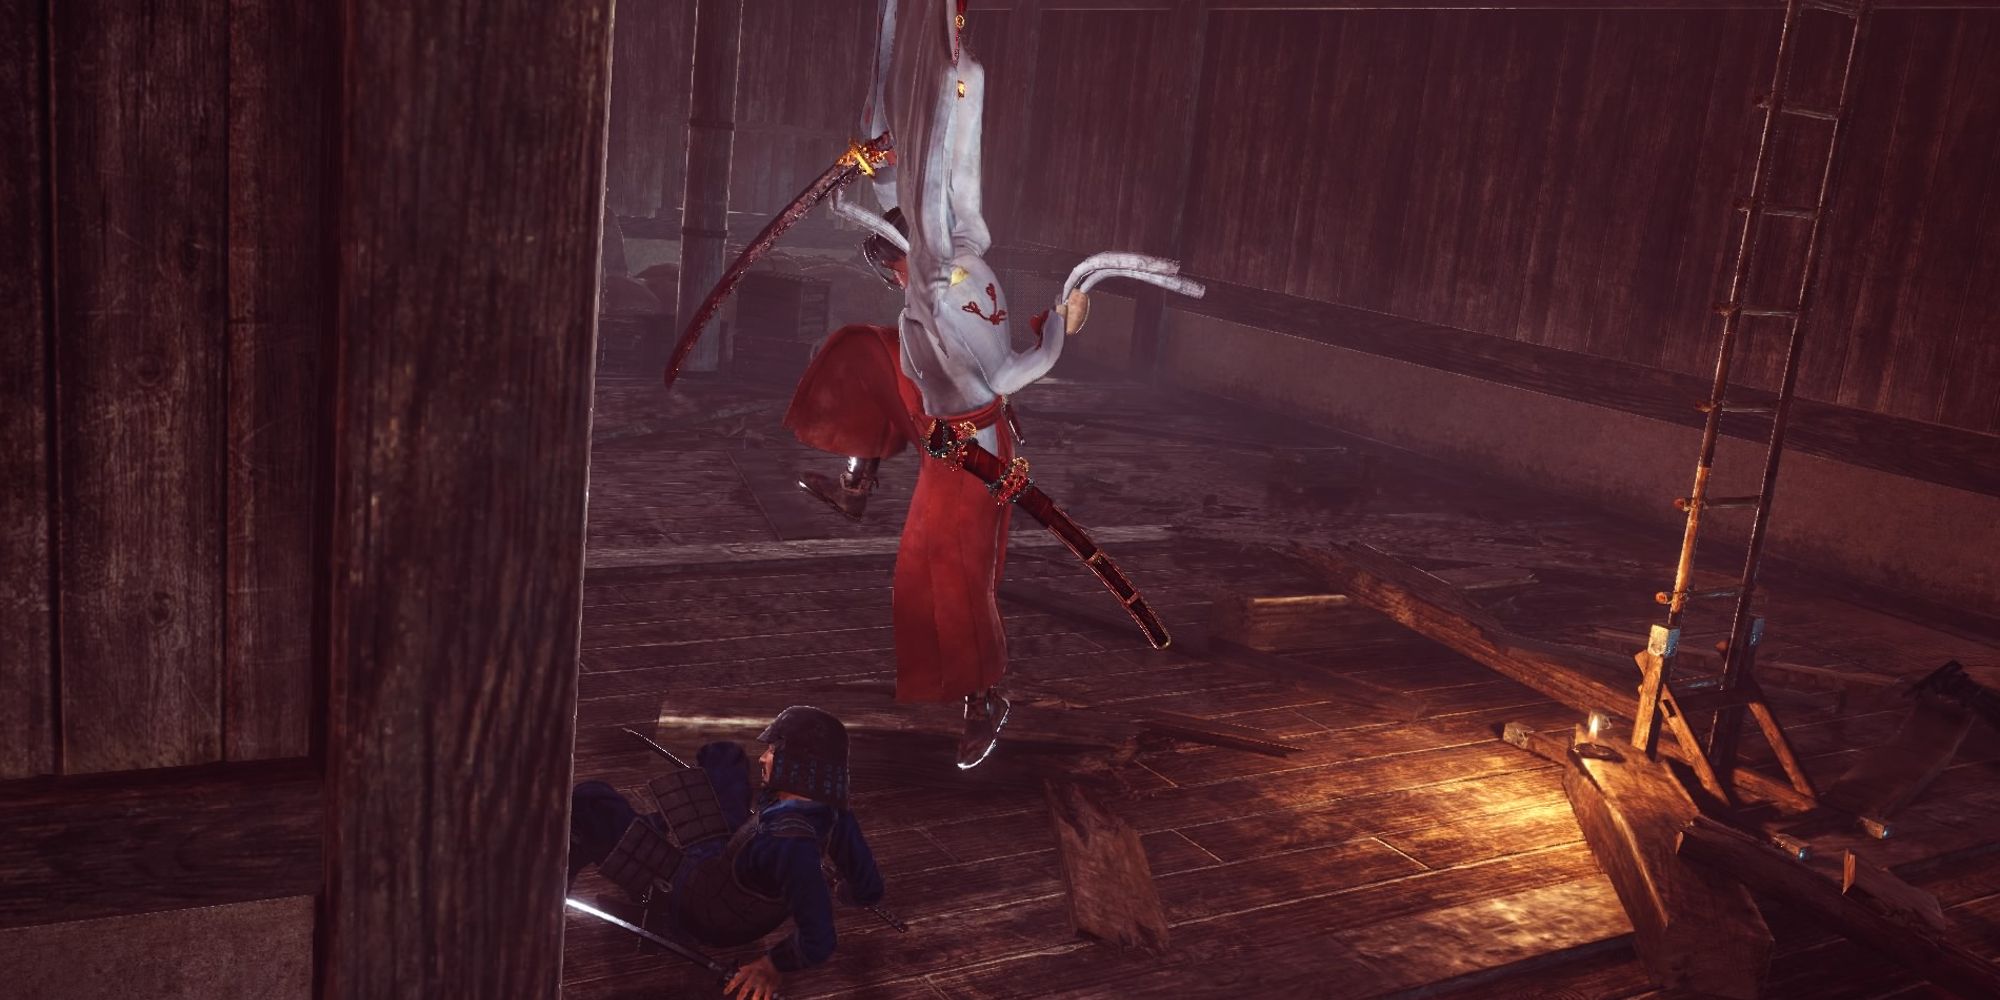 Nioh 2 player character executing an enemy soldier